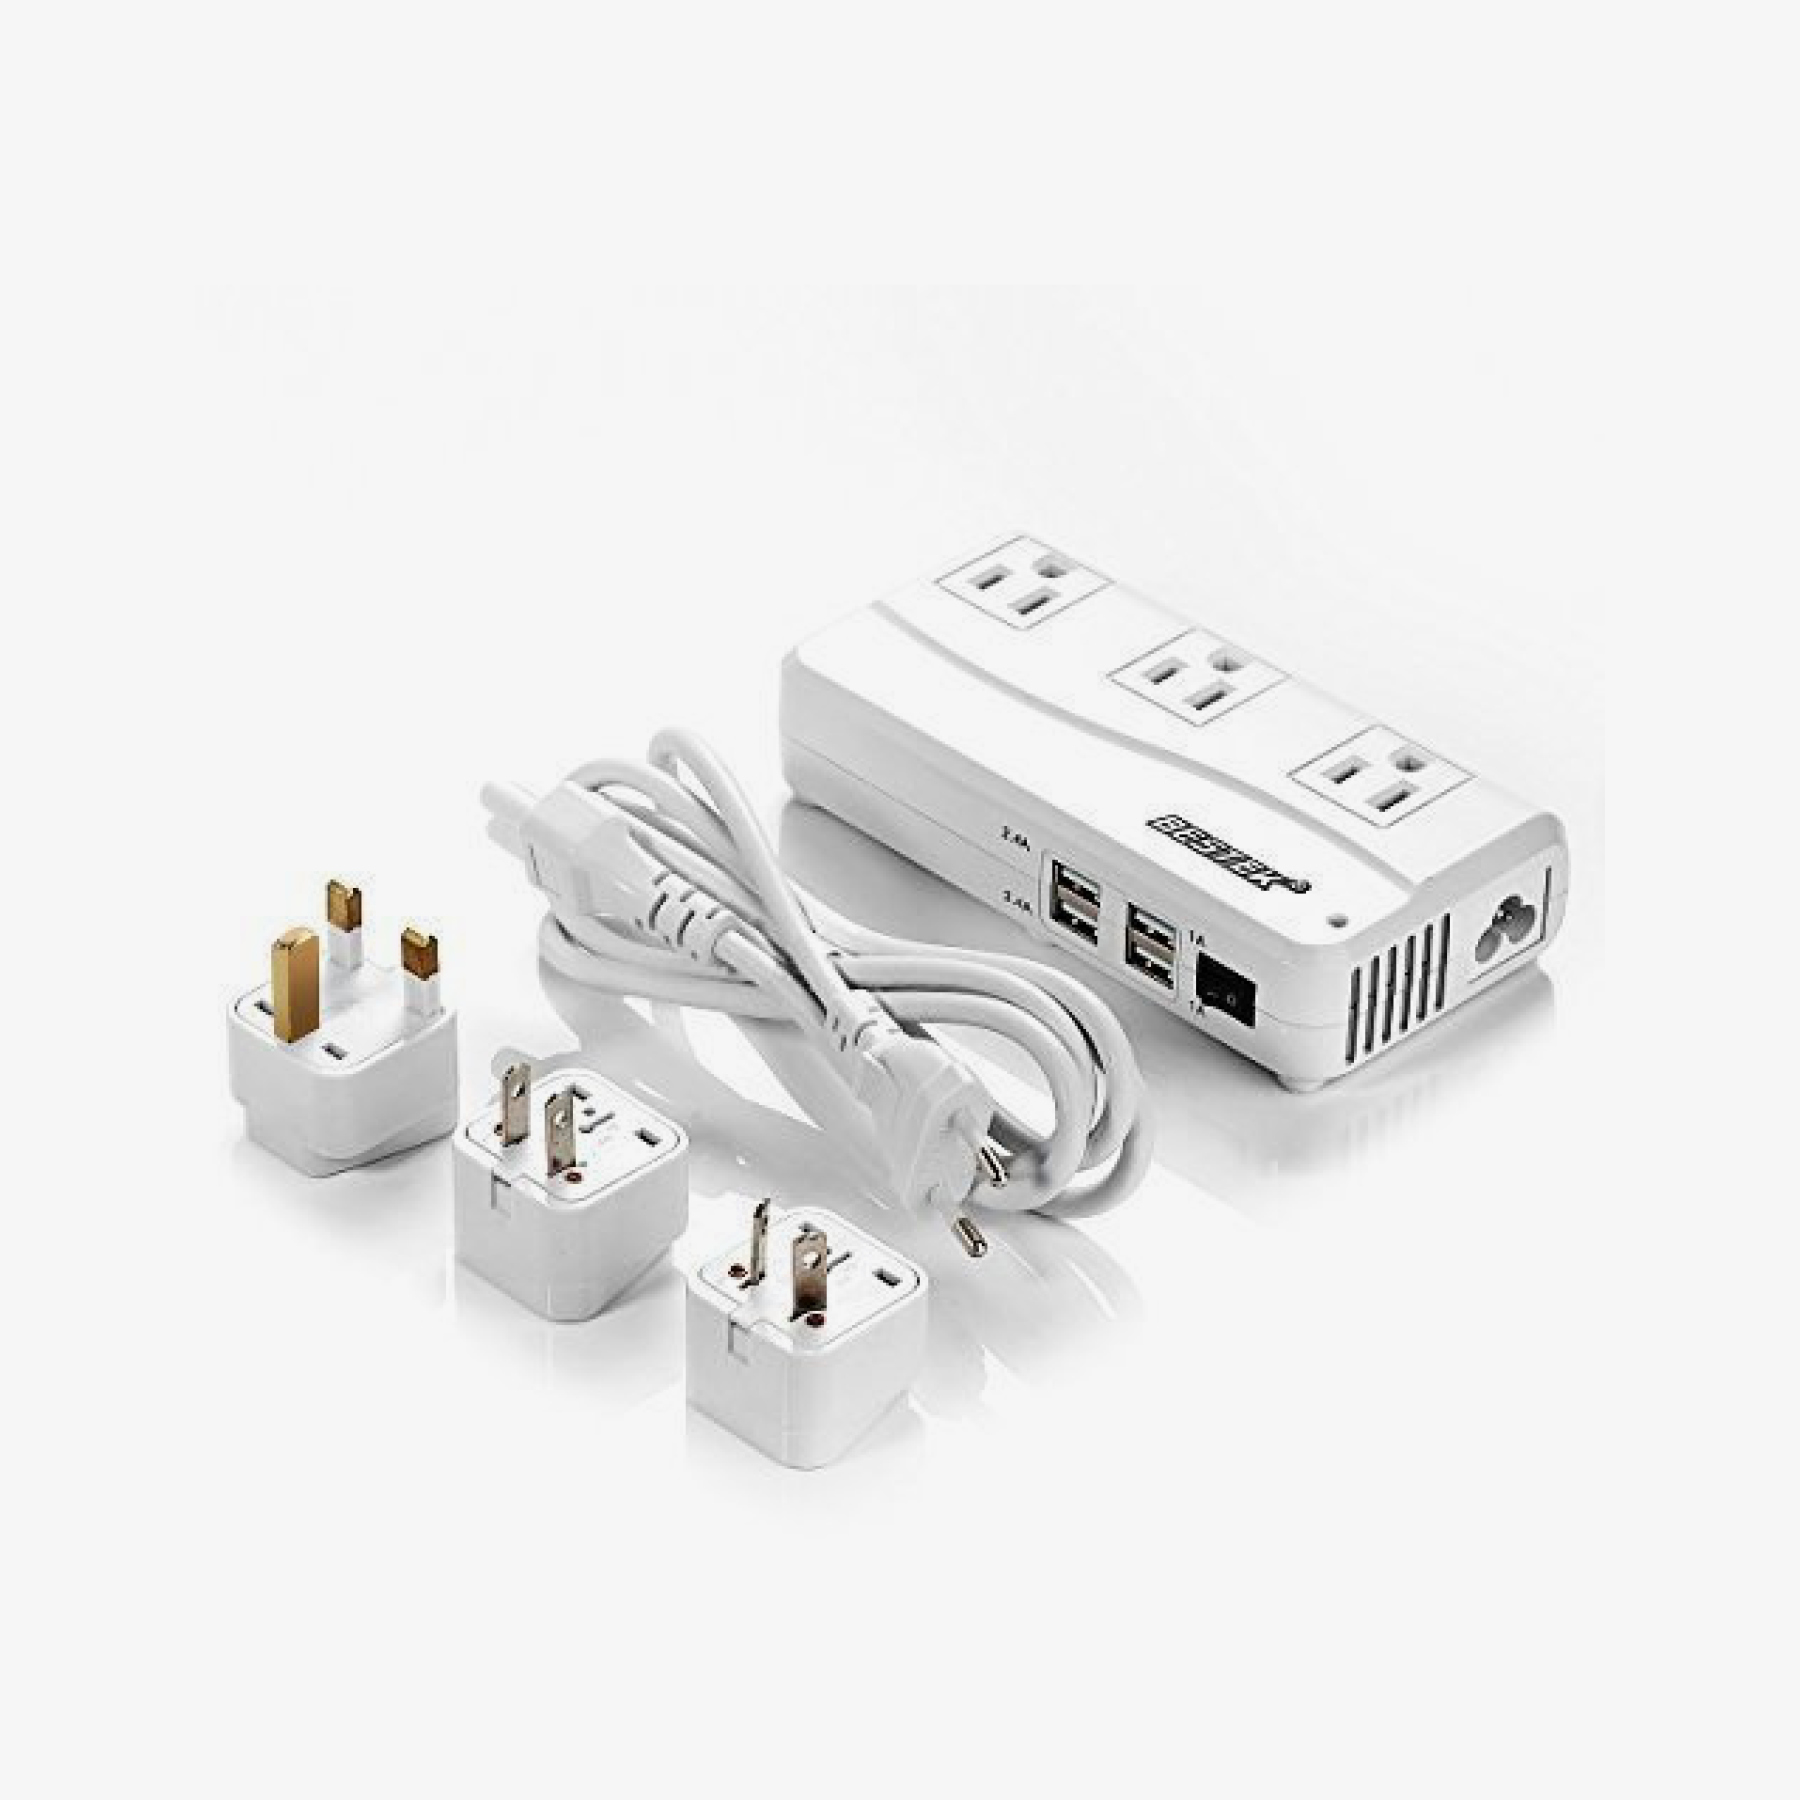 ALL-SORTS-OF-UNIVERSAL-TRAVEL-ADAPTER2